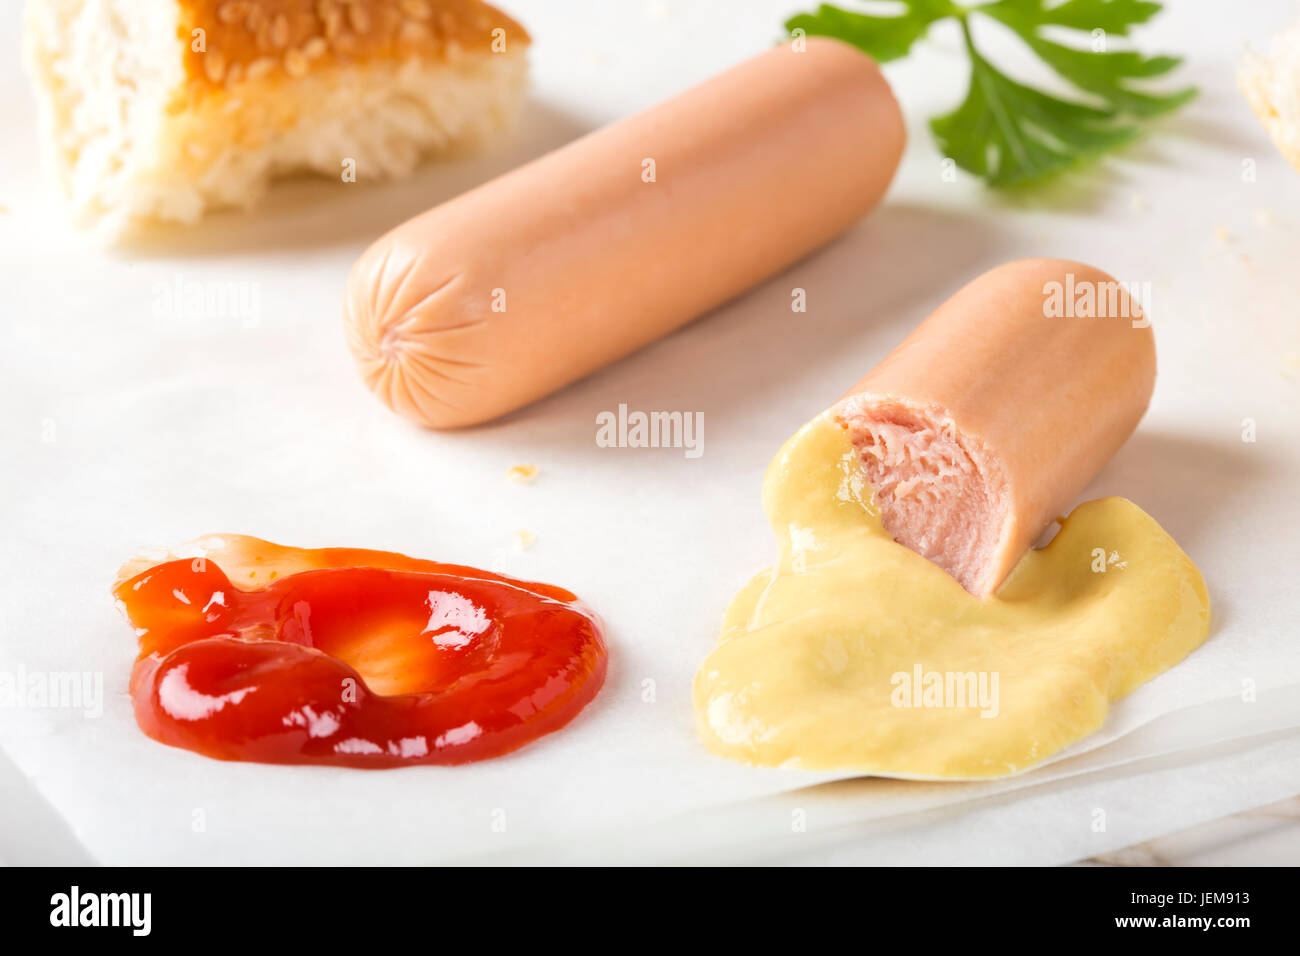 Eating Sausages (Frankfurter) on paper with bread, mustard and ketchup Stock Photo